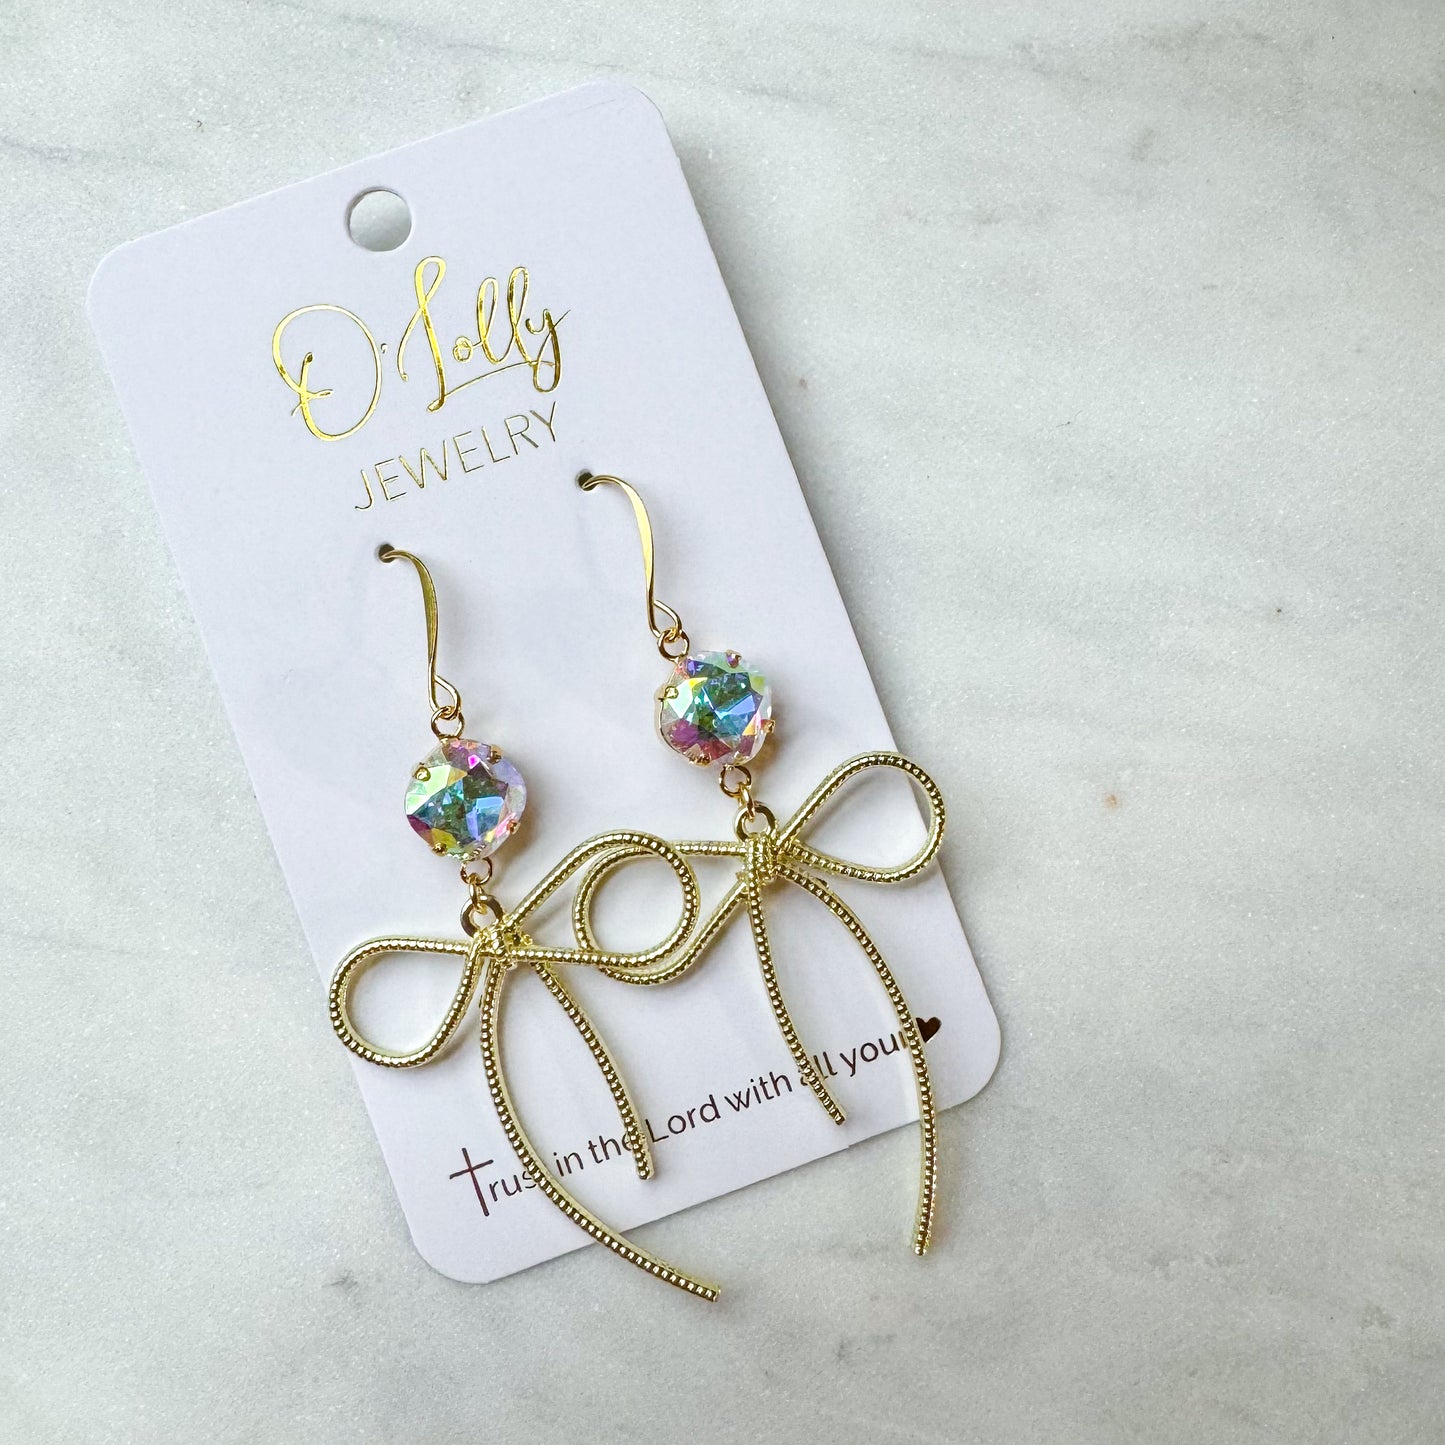 O’Lolly “Bow” Earrings - AB Stone w/Gold Bow